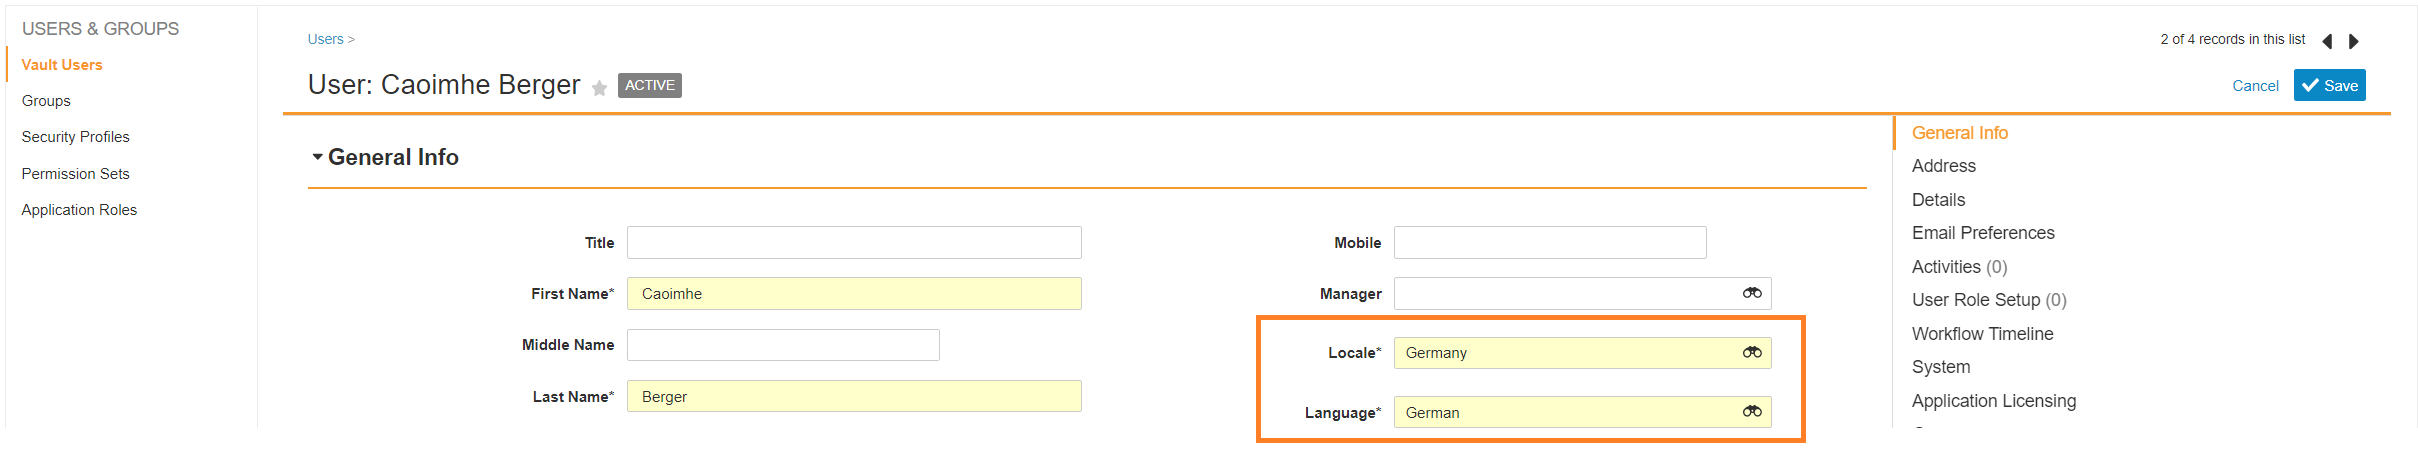 Language and Locale Settings on User Profile